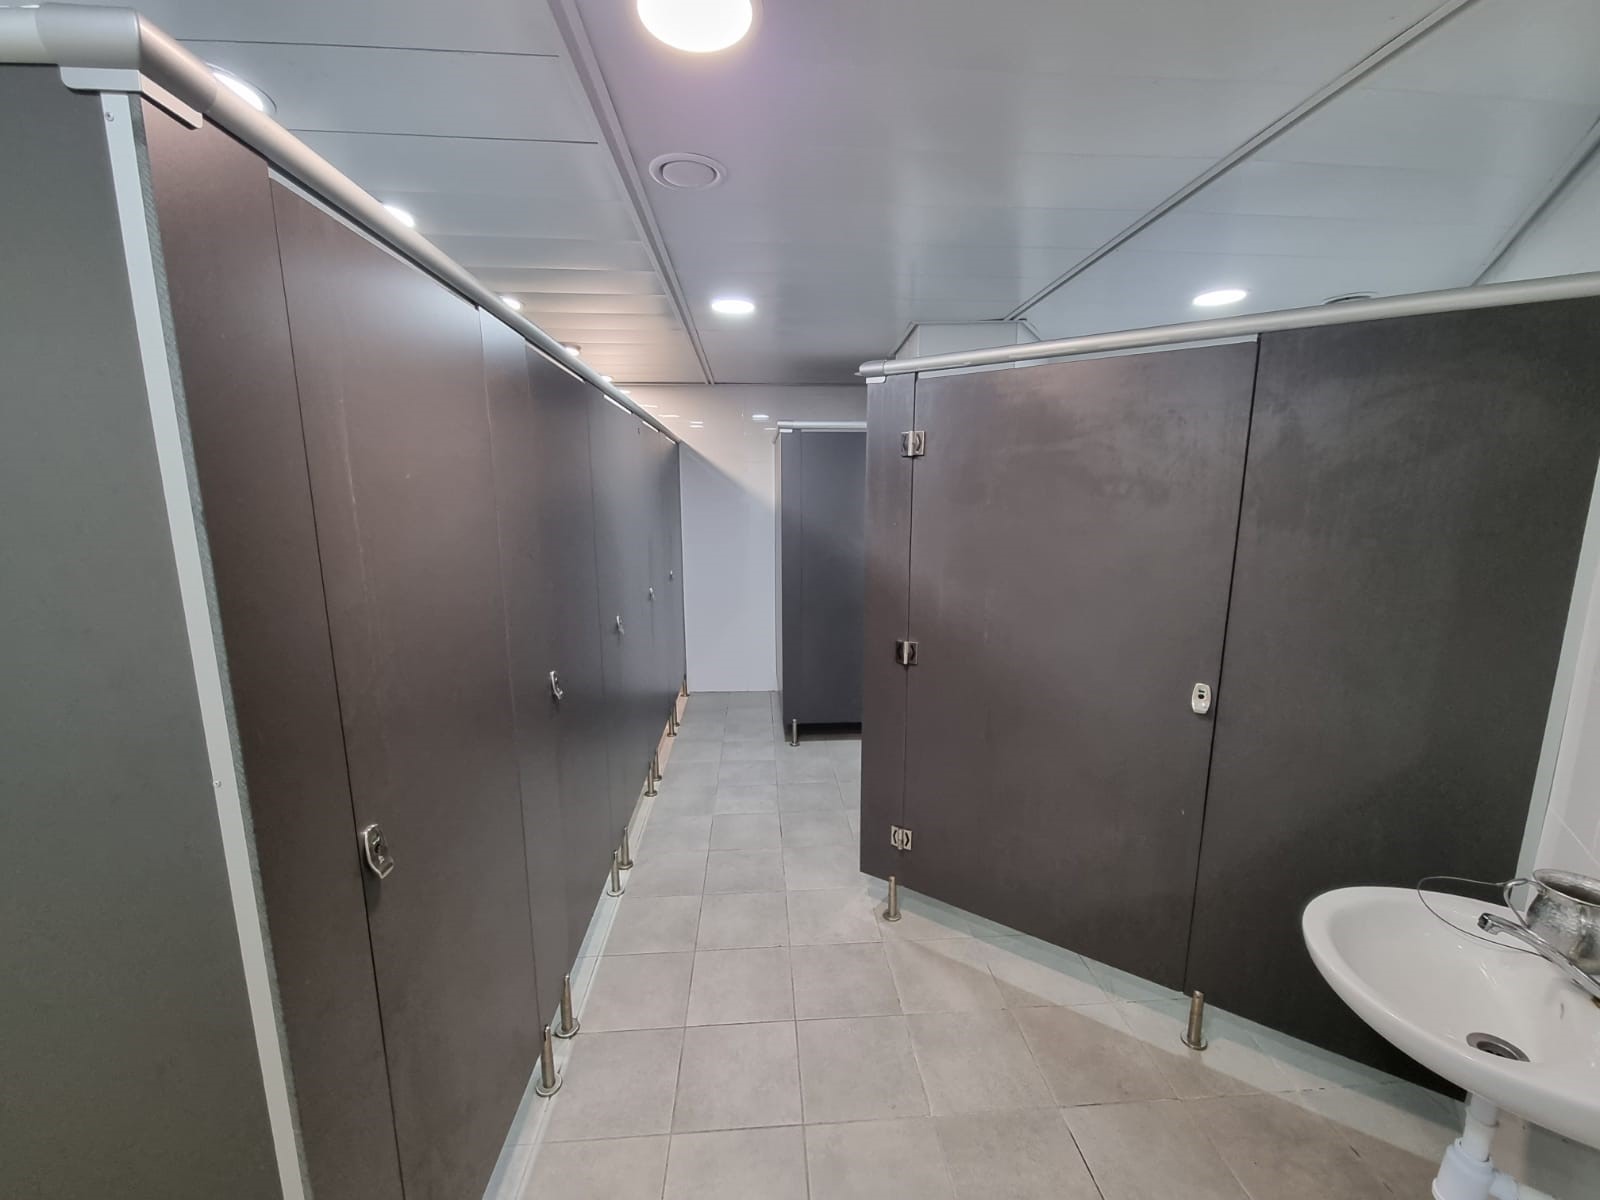 Renovation of the Public Restrooms